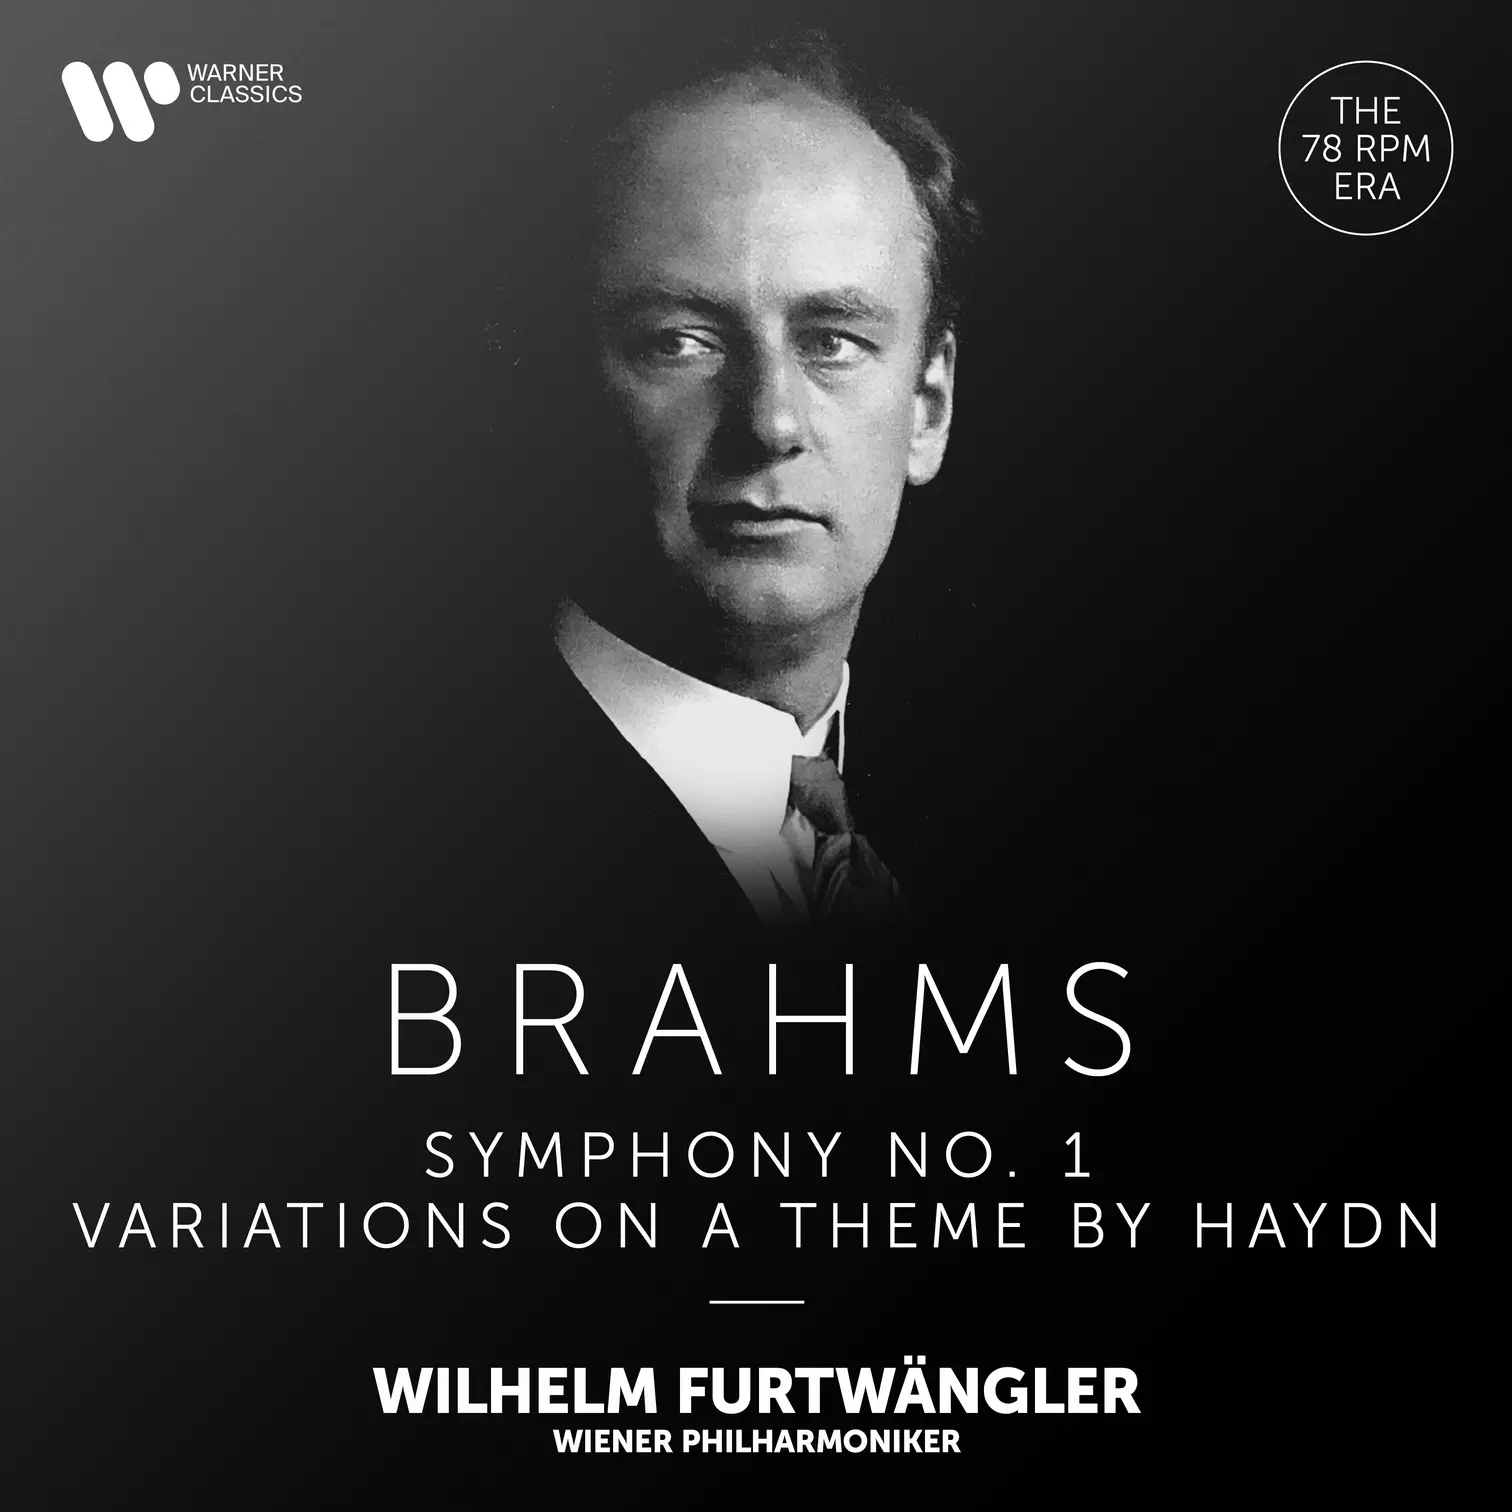 Brahms: Symphony No. 1 & Variations on a Theme by Haydn